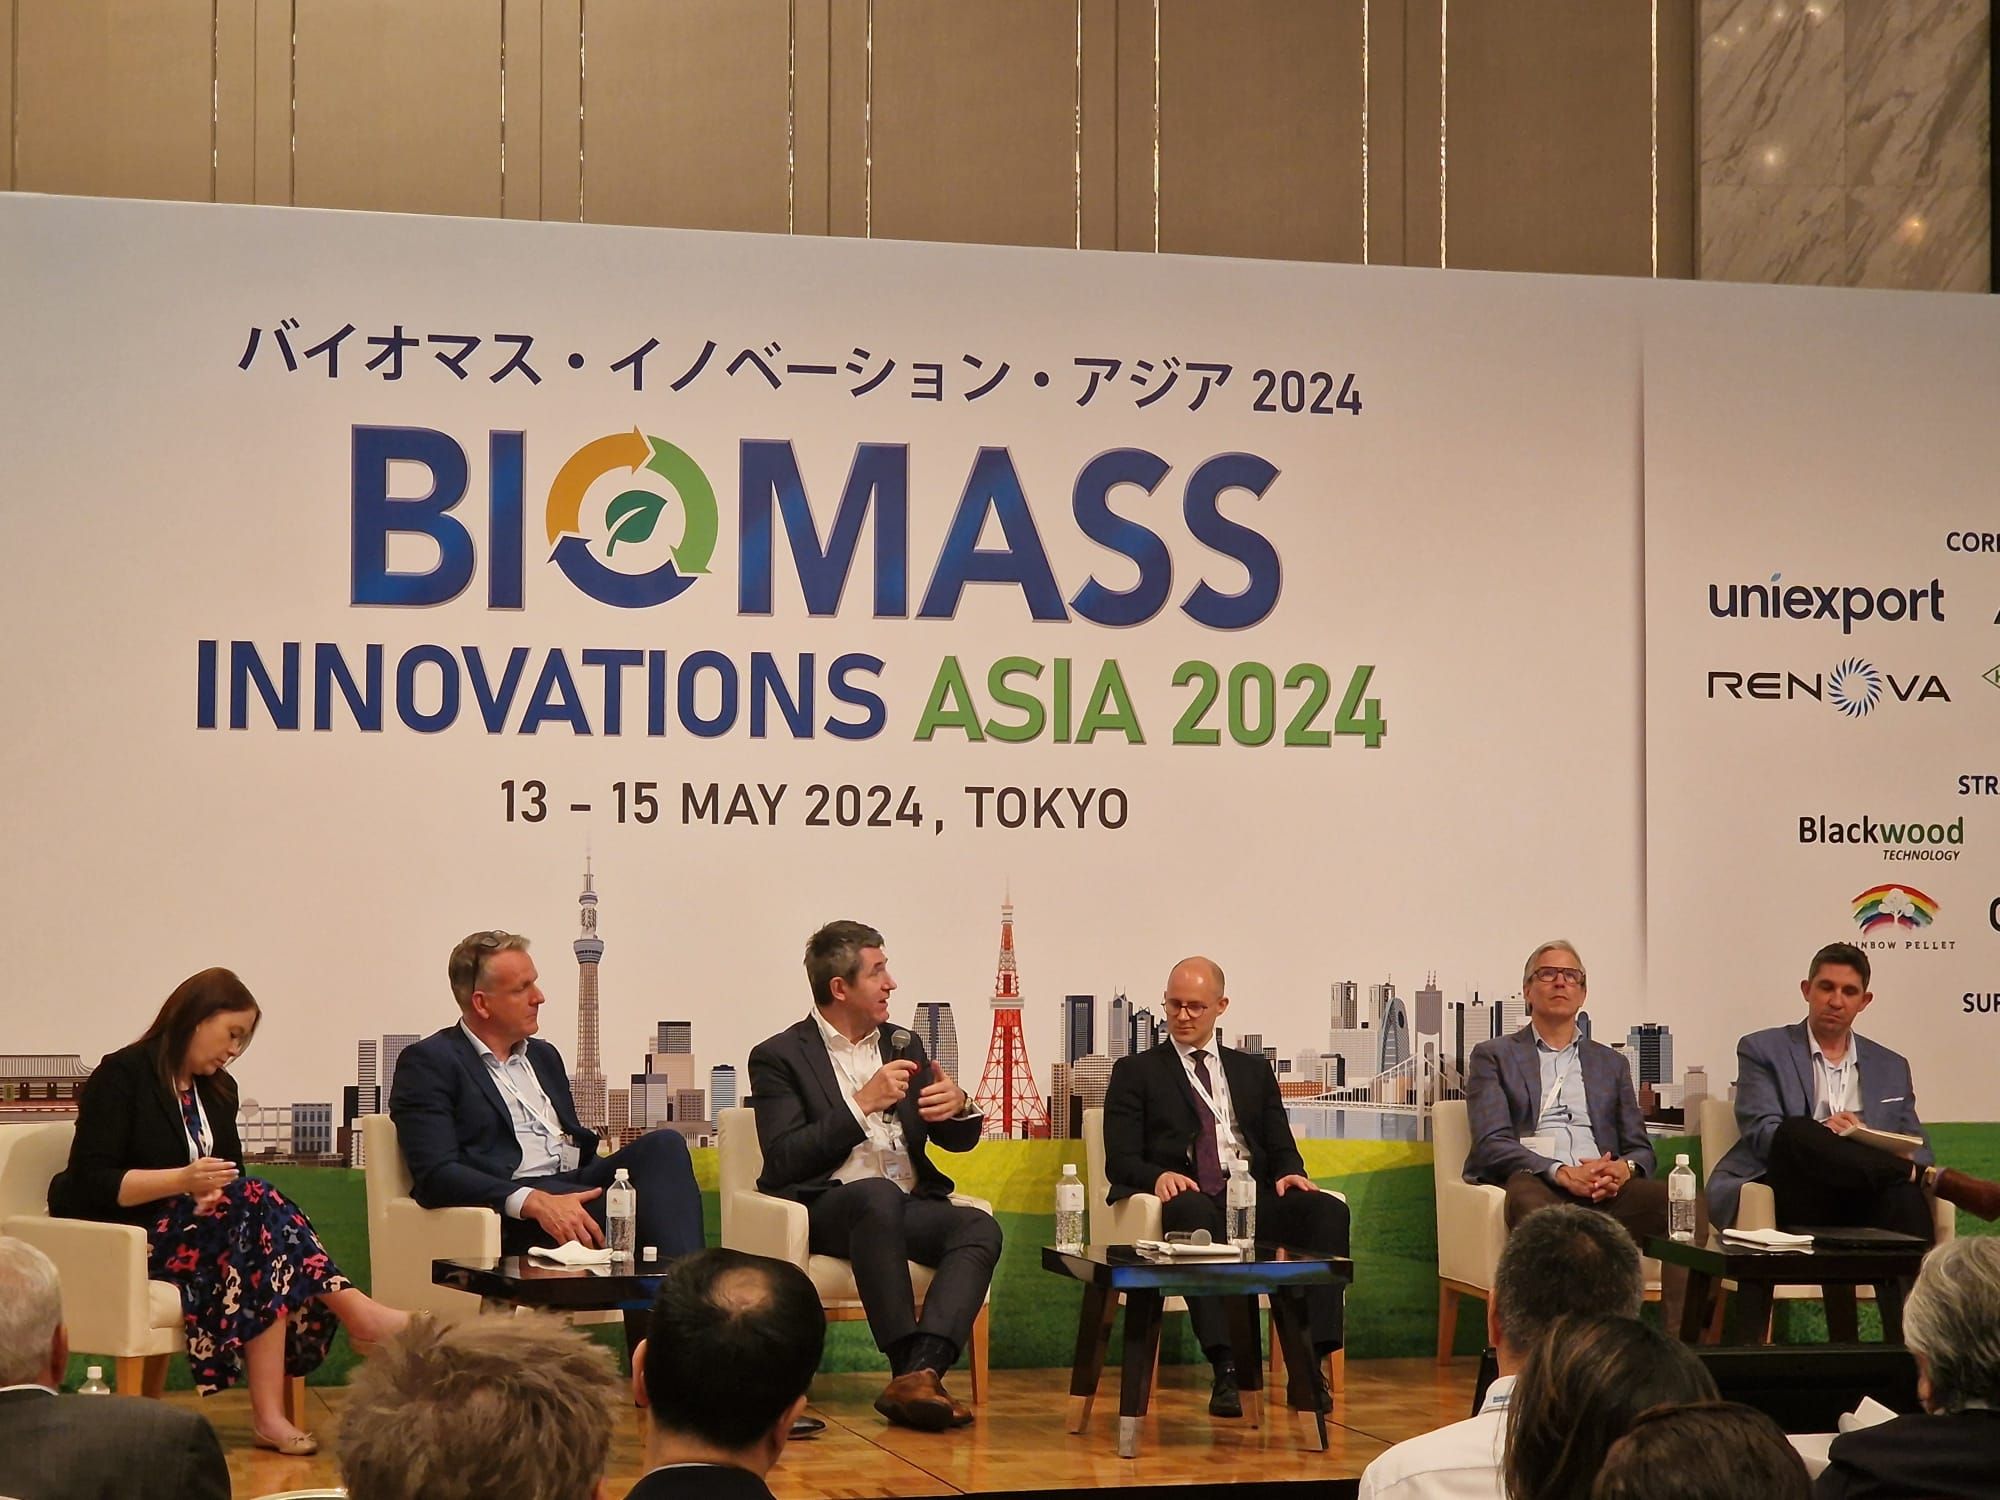 Volumes are staggering - Recap from CMTs Biomass Innovations Conference Japan